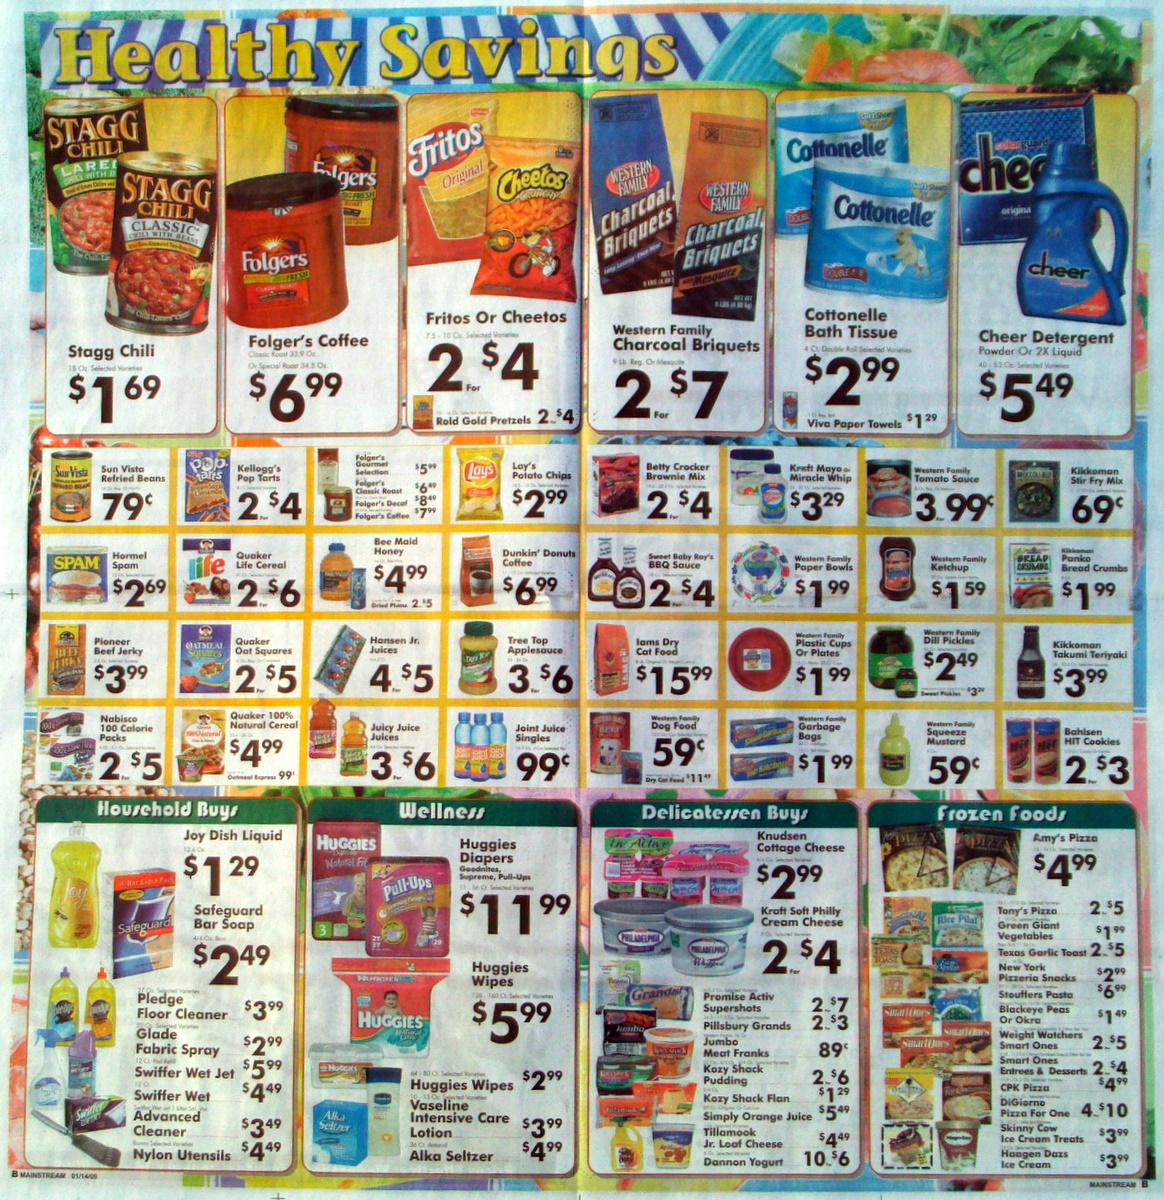 Big Trees Market Weekly Ad for January 14-20, 2009